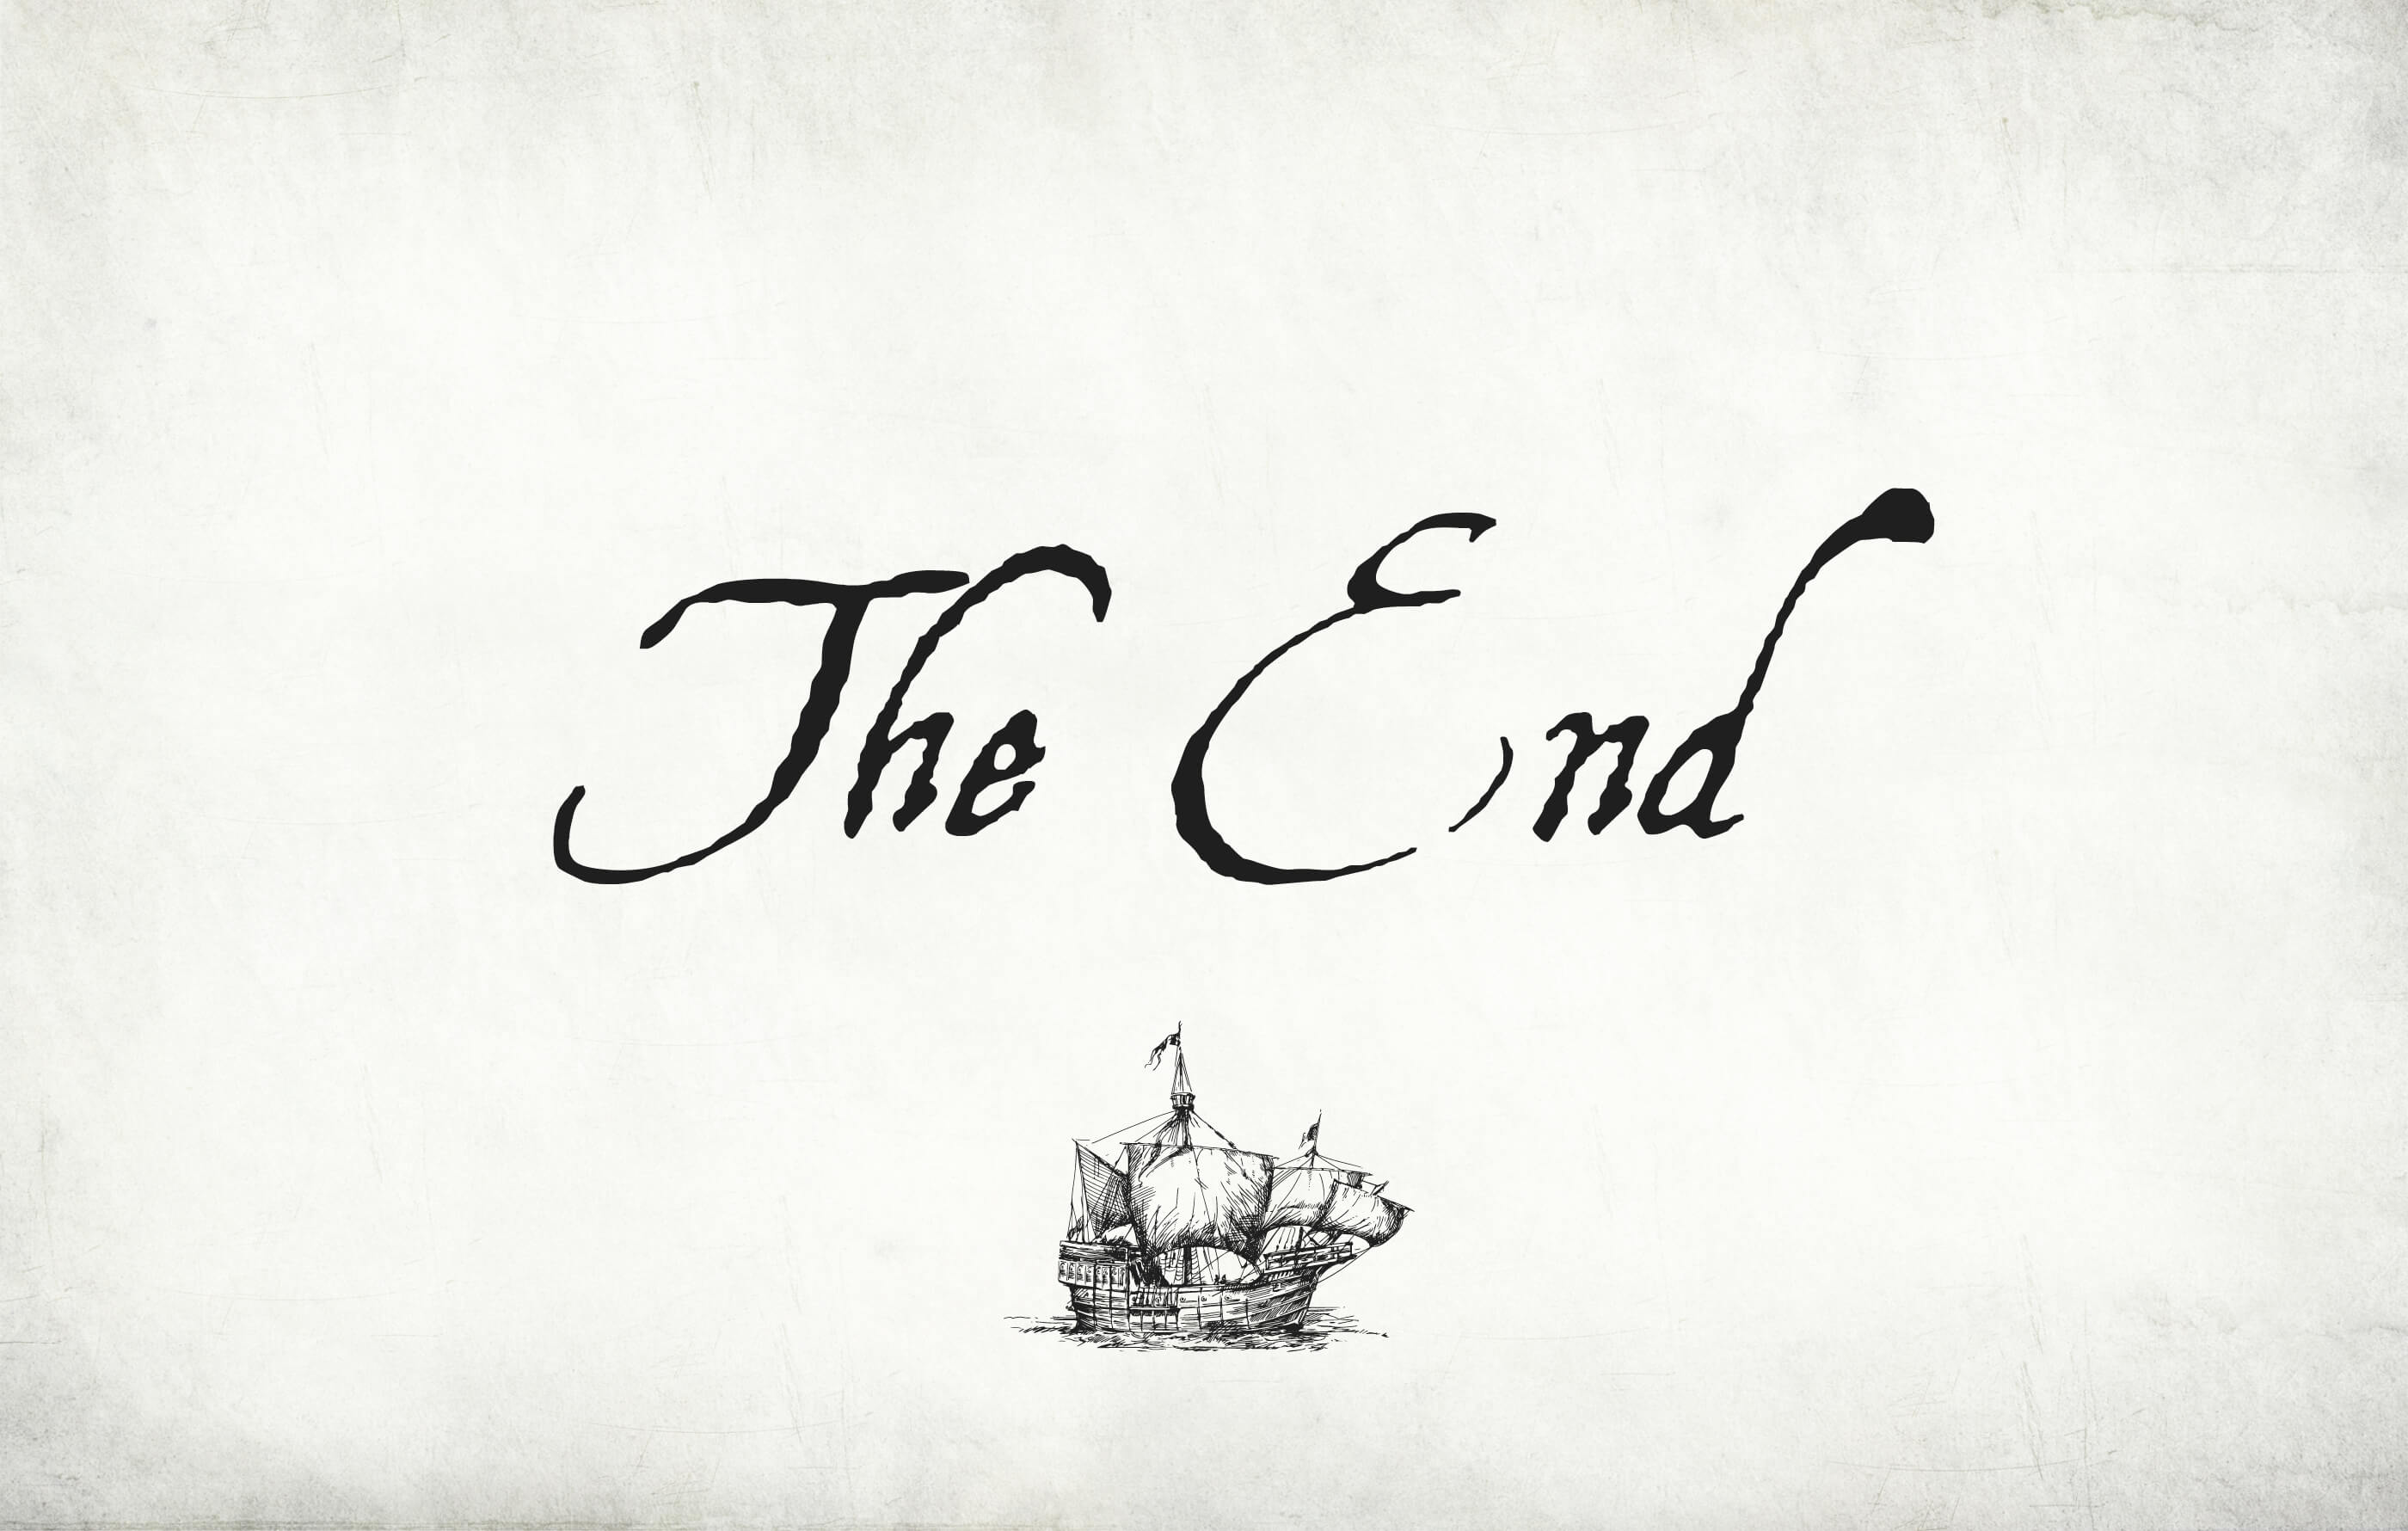 'The End' wording, centred on the page and written in a black, script font on a vintage, weathered background